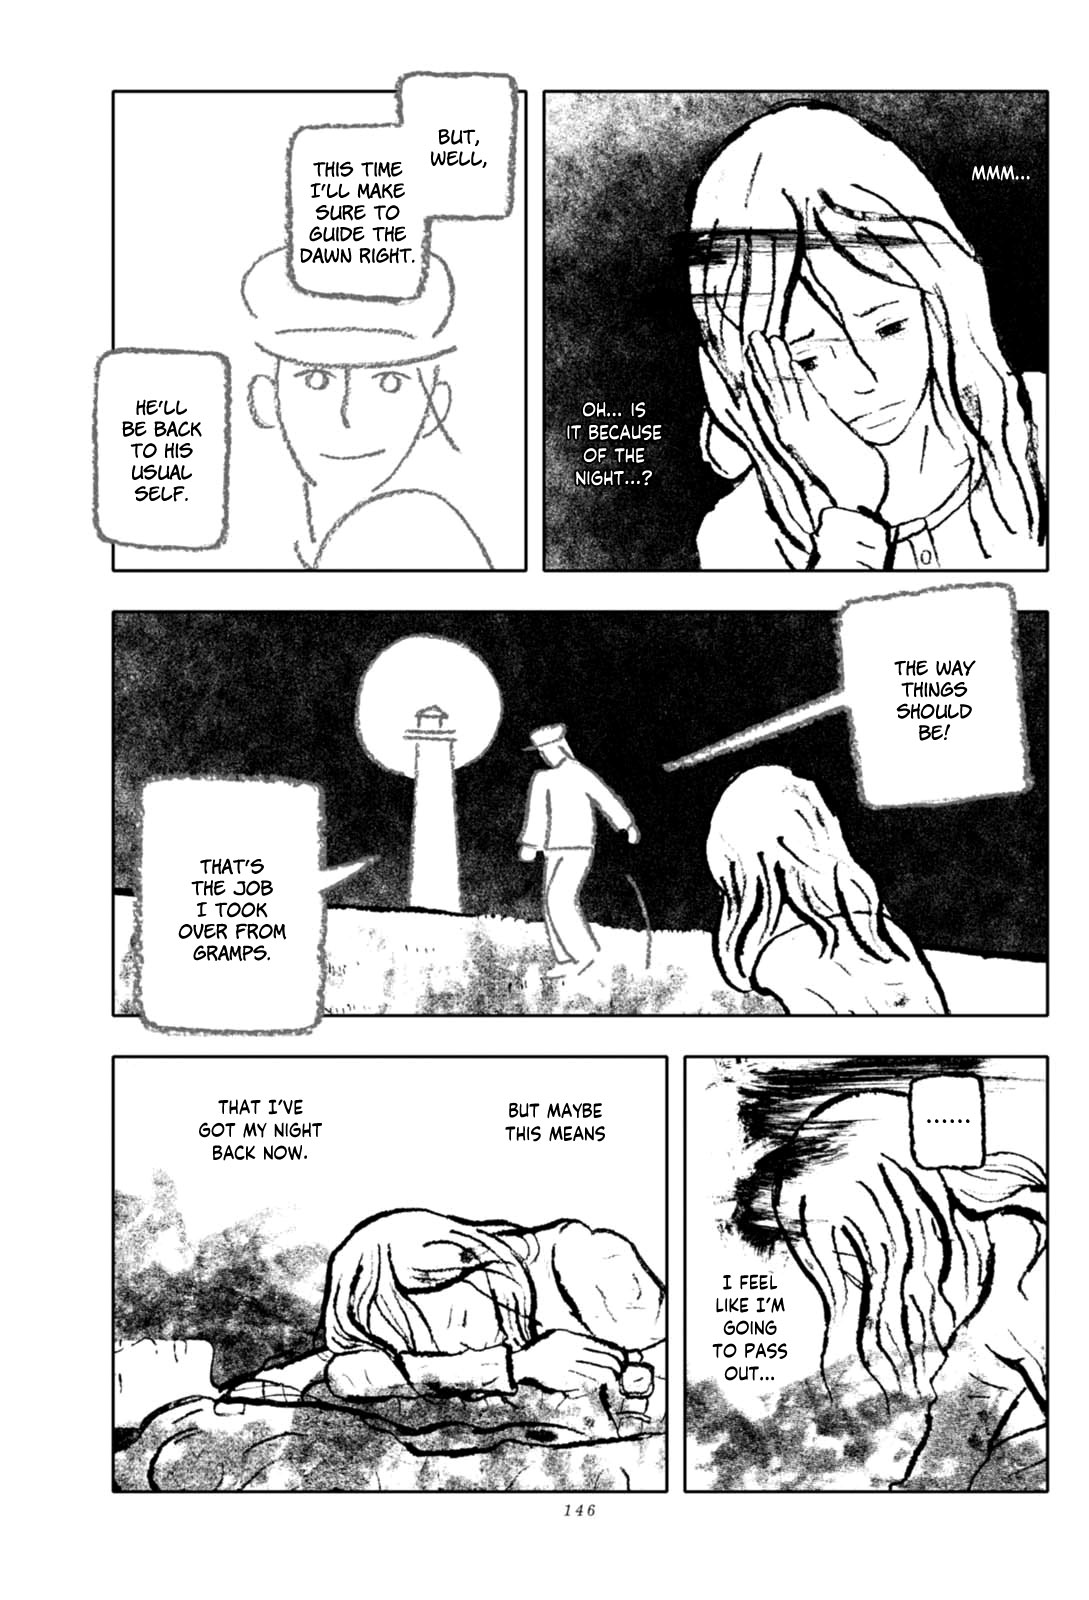 In the Night Comes a Girl Vol. 1 Ch. 6